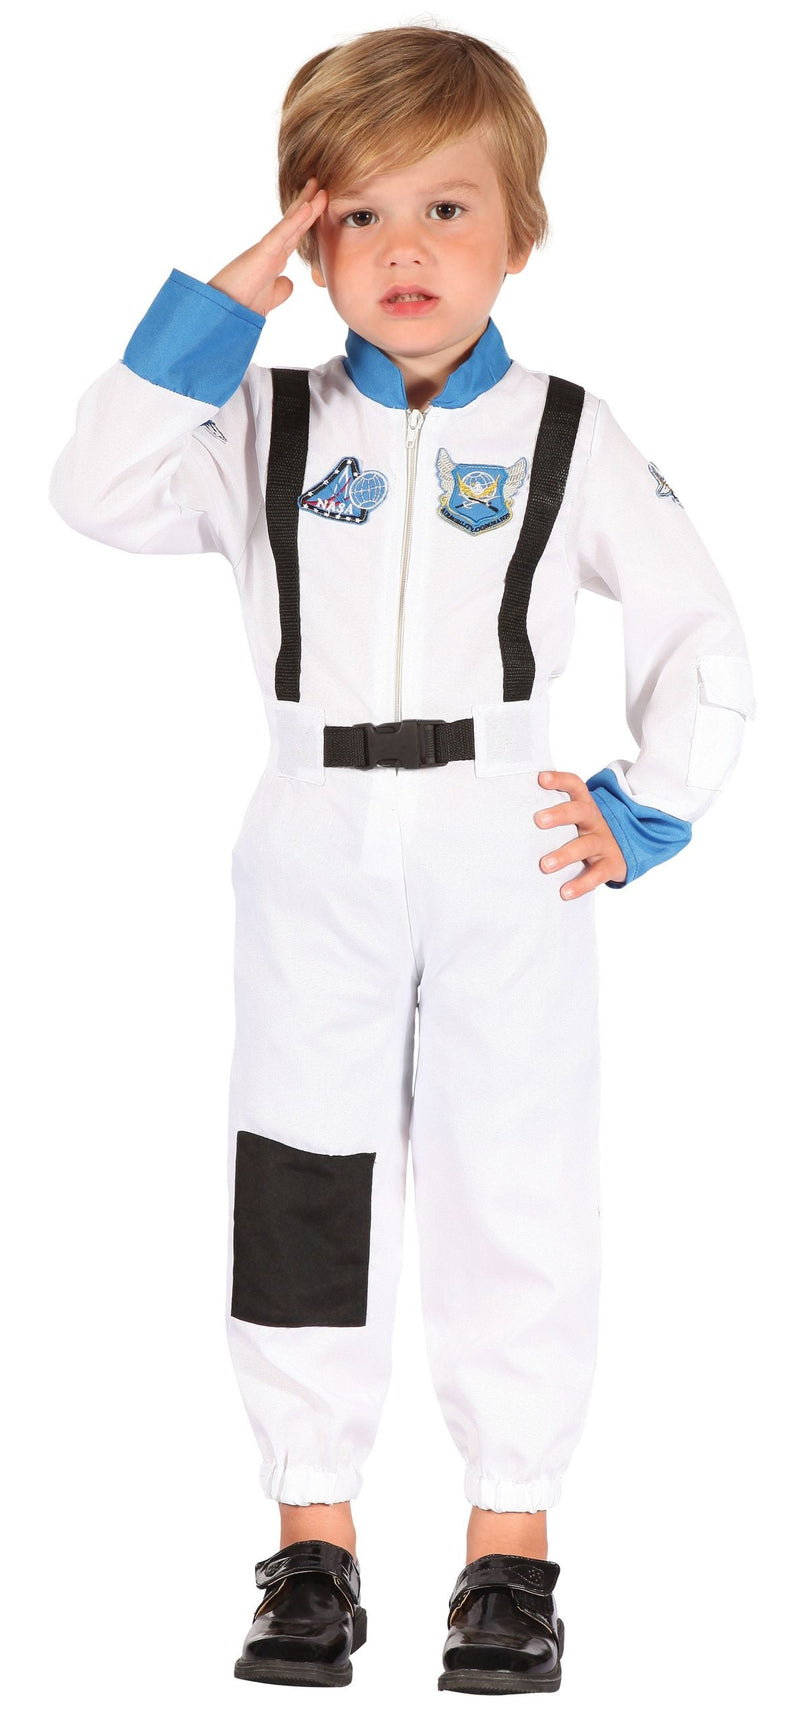 Boys Astronaut Toddler Childrens Costume Male To Fit Child Of Height 90cm 100cm Halloween_1 CC065